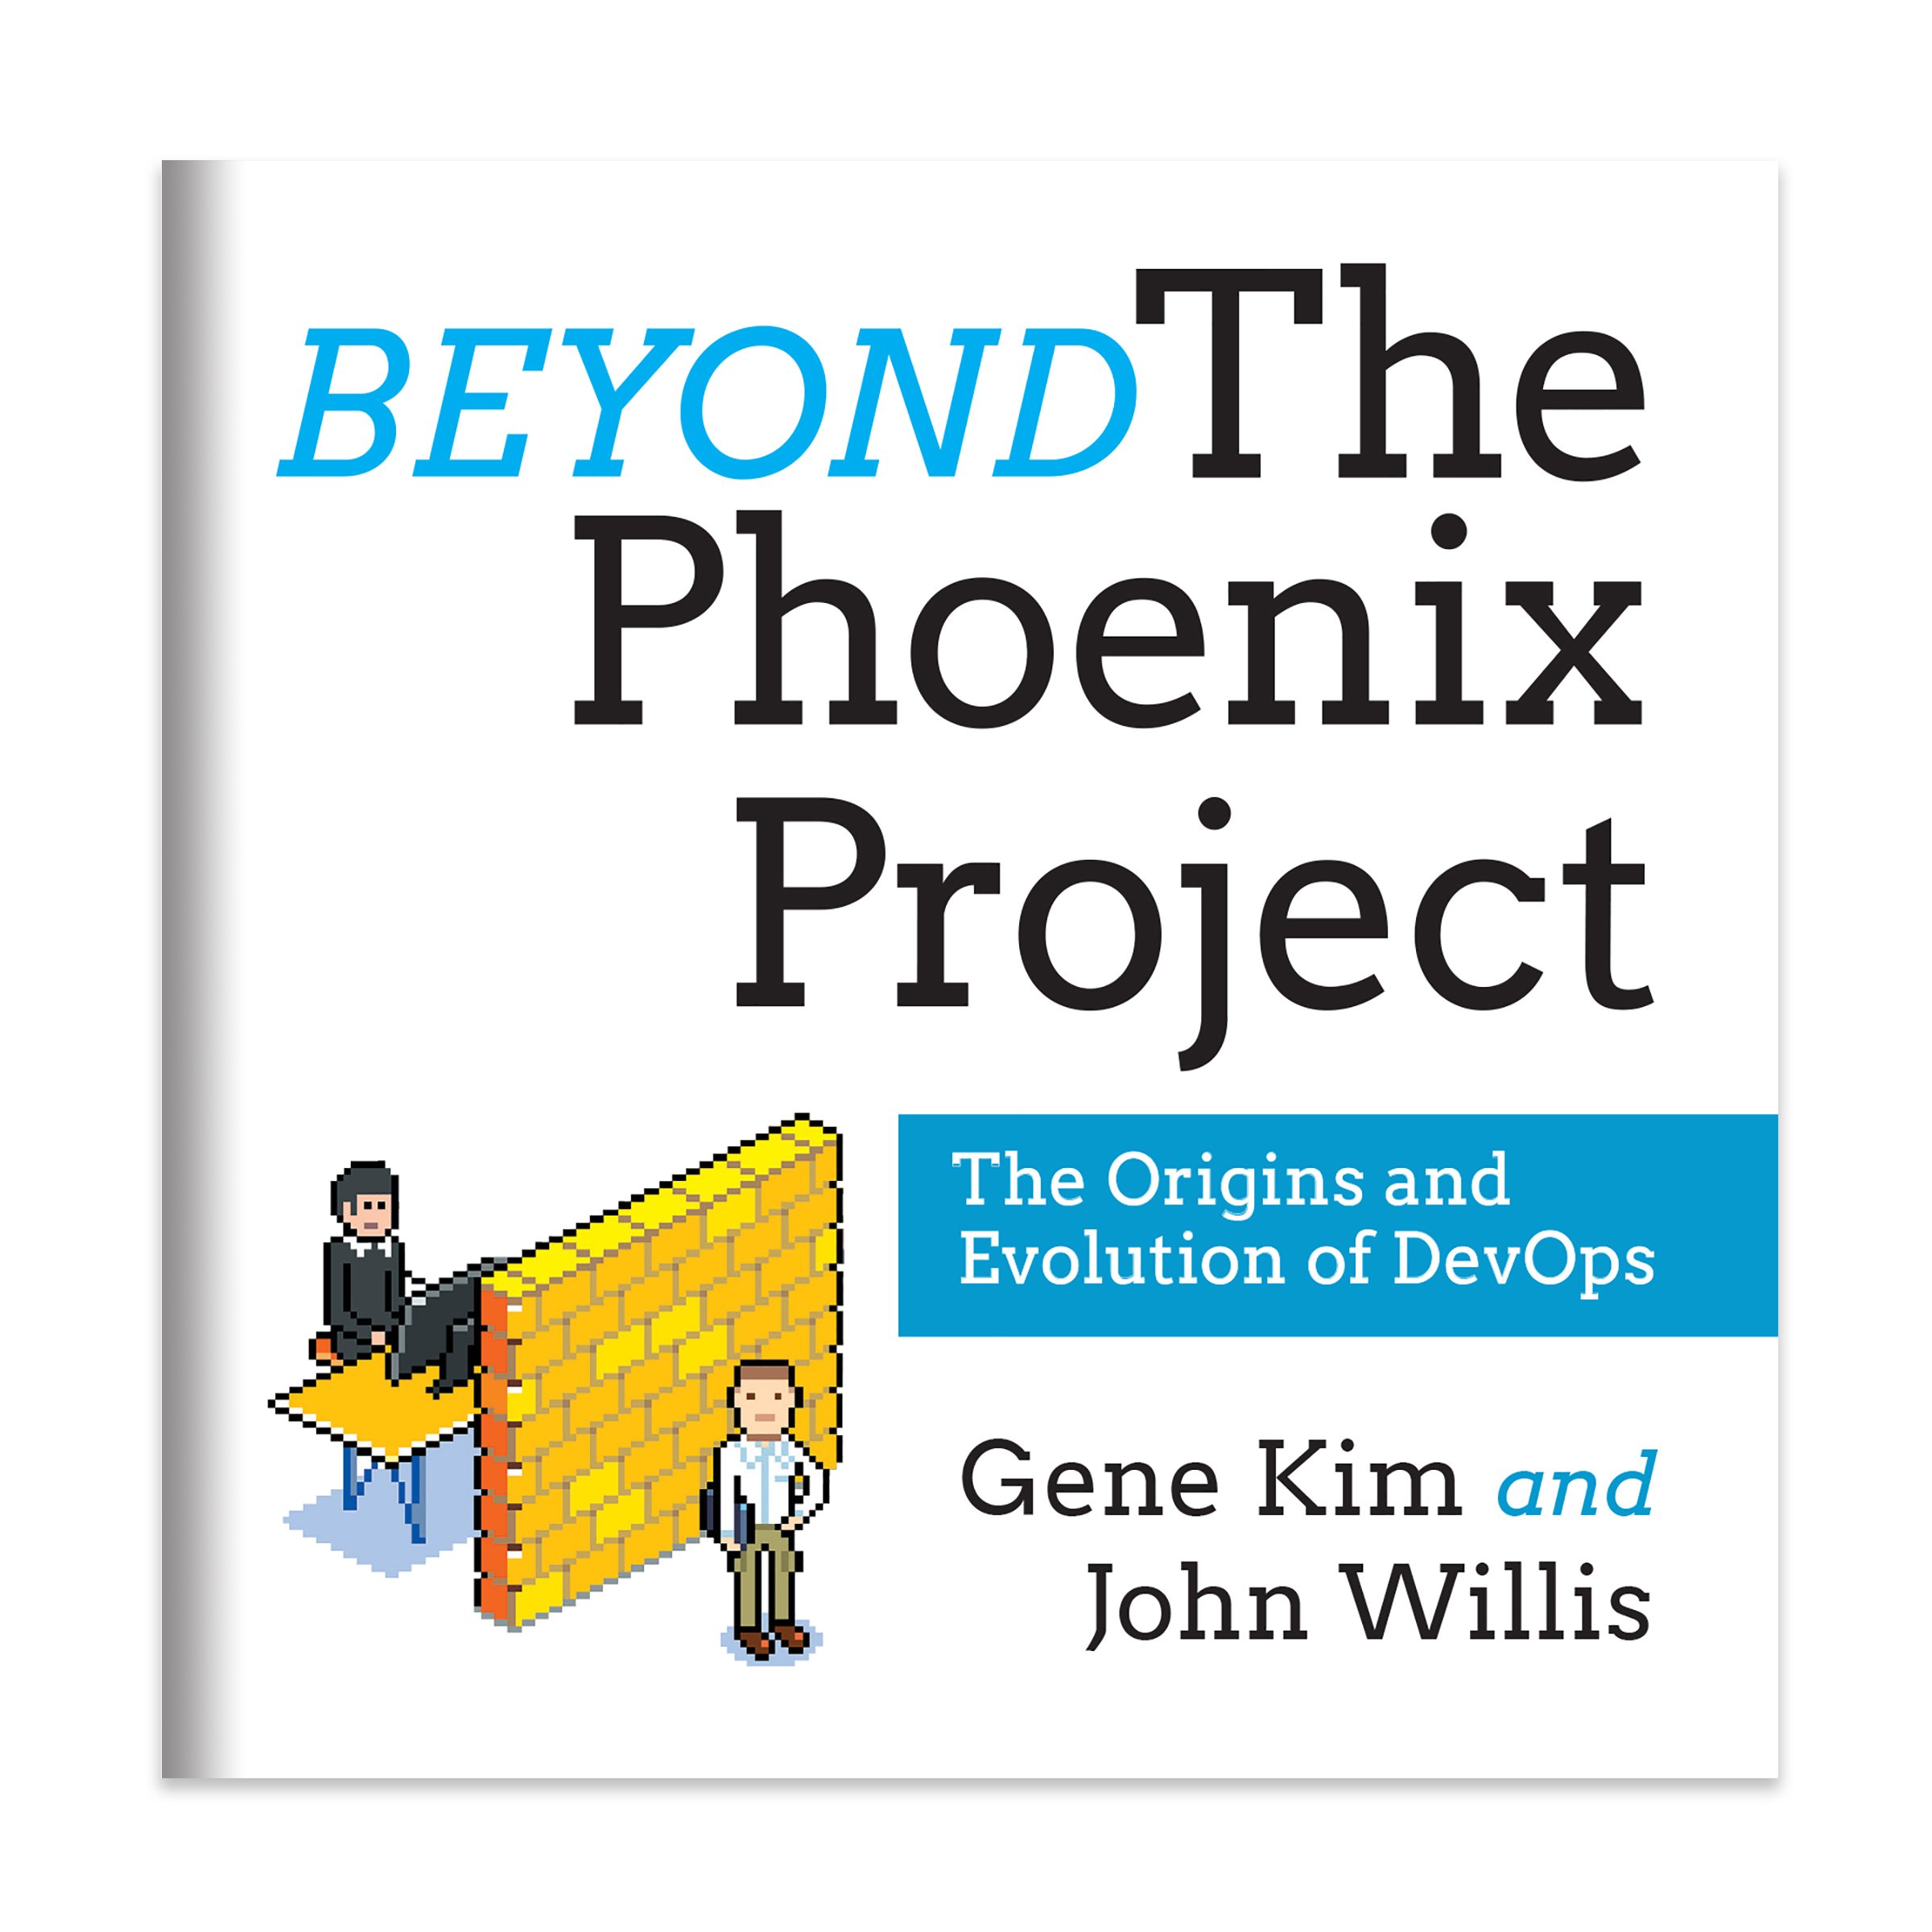 Beyond the Phoenix Project: The Origins and Evolution of DevOps